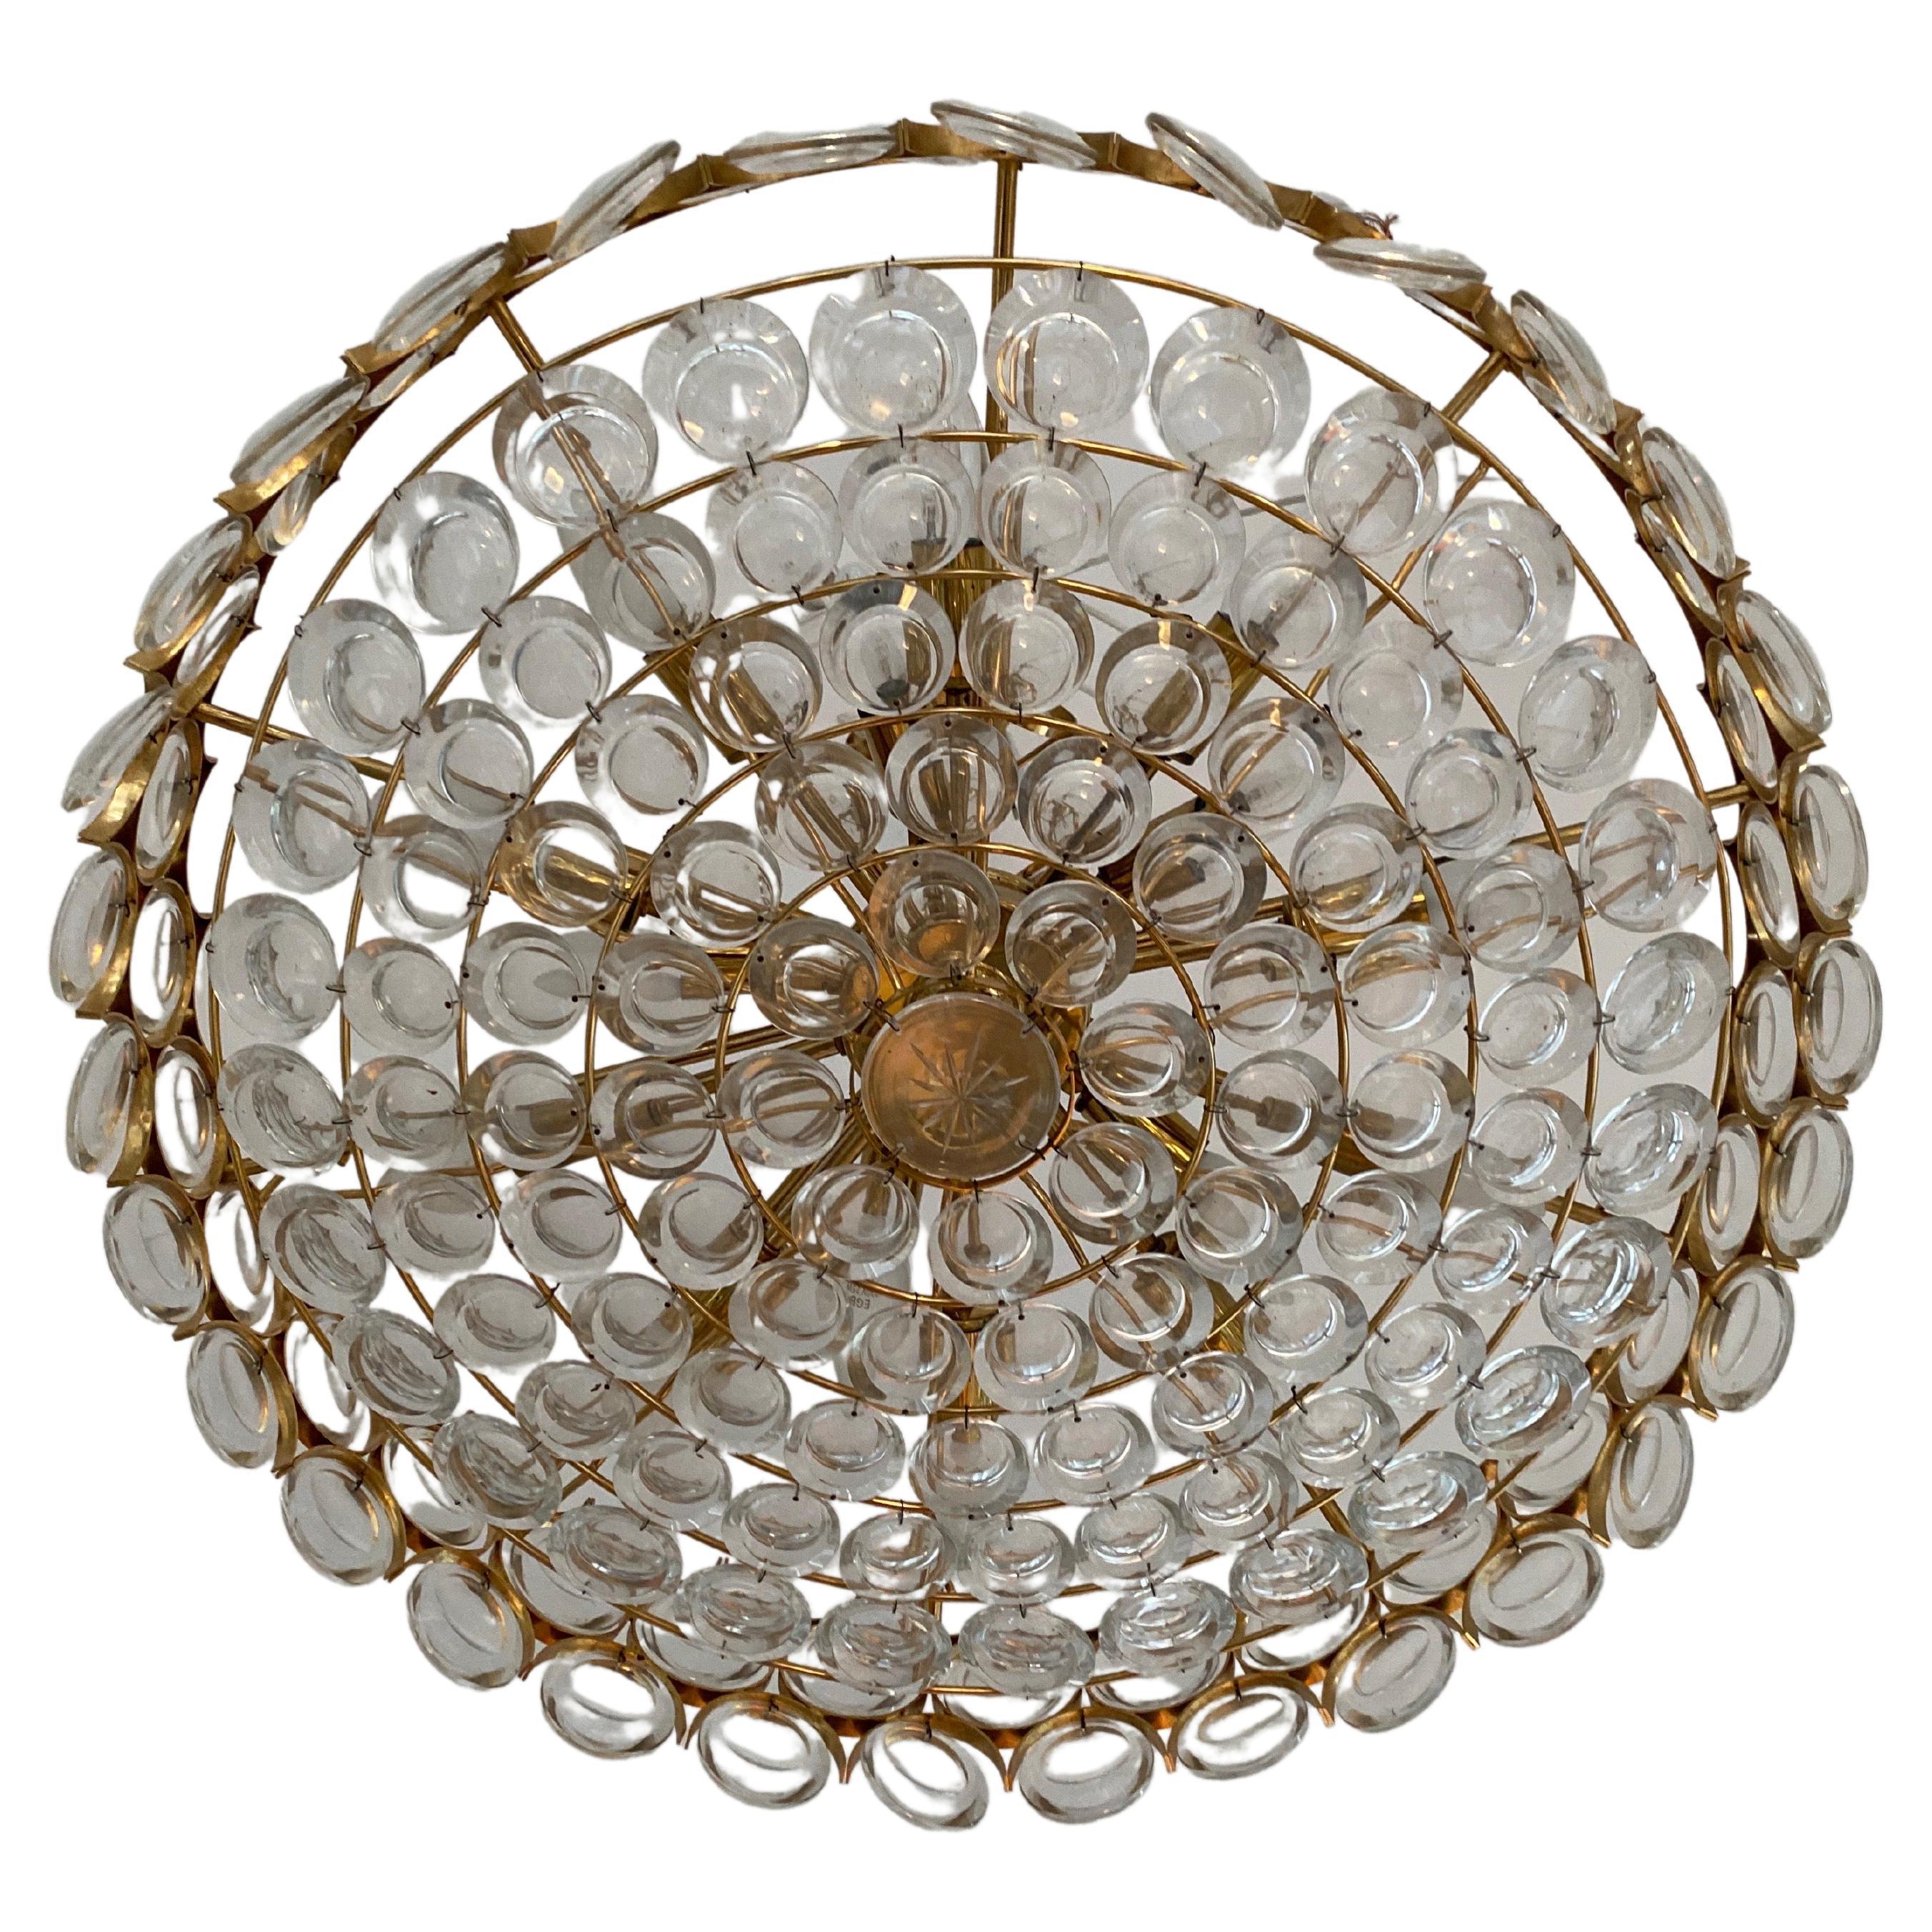 A beautiful Mid-Century ceiling chandelier manufactured by Palwa, Germany, 1970s.It is made of a 24-carat gold-plated brass frame decorated with individual 